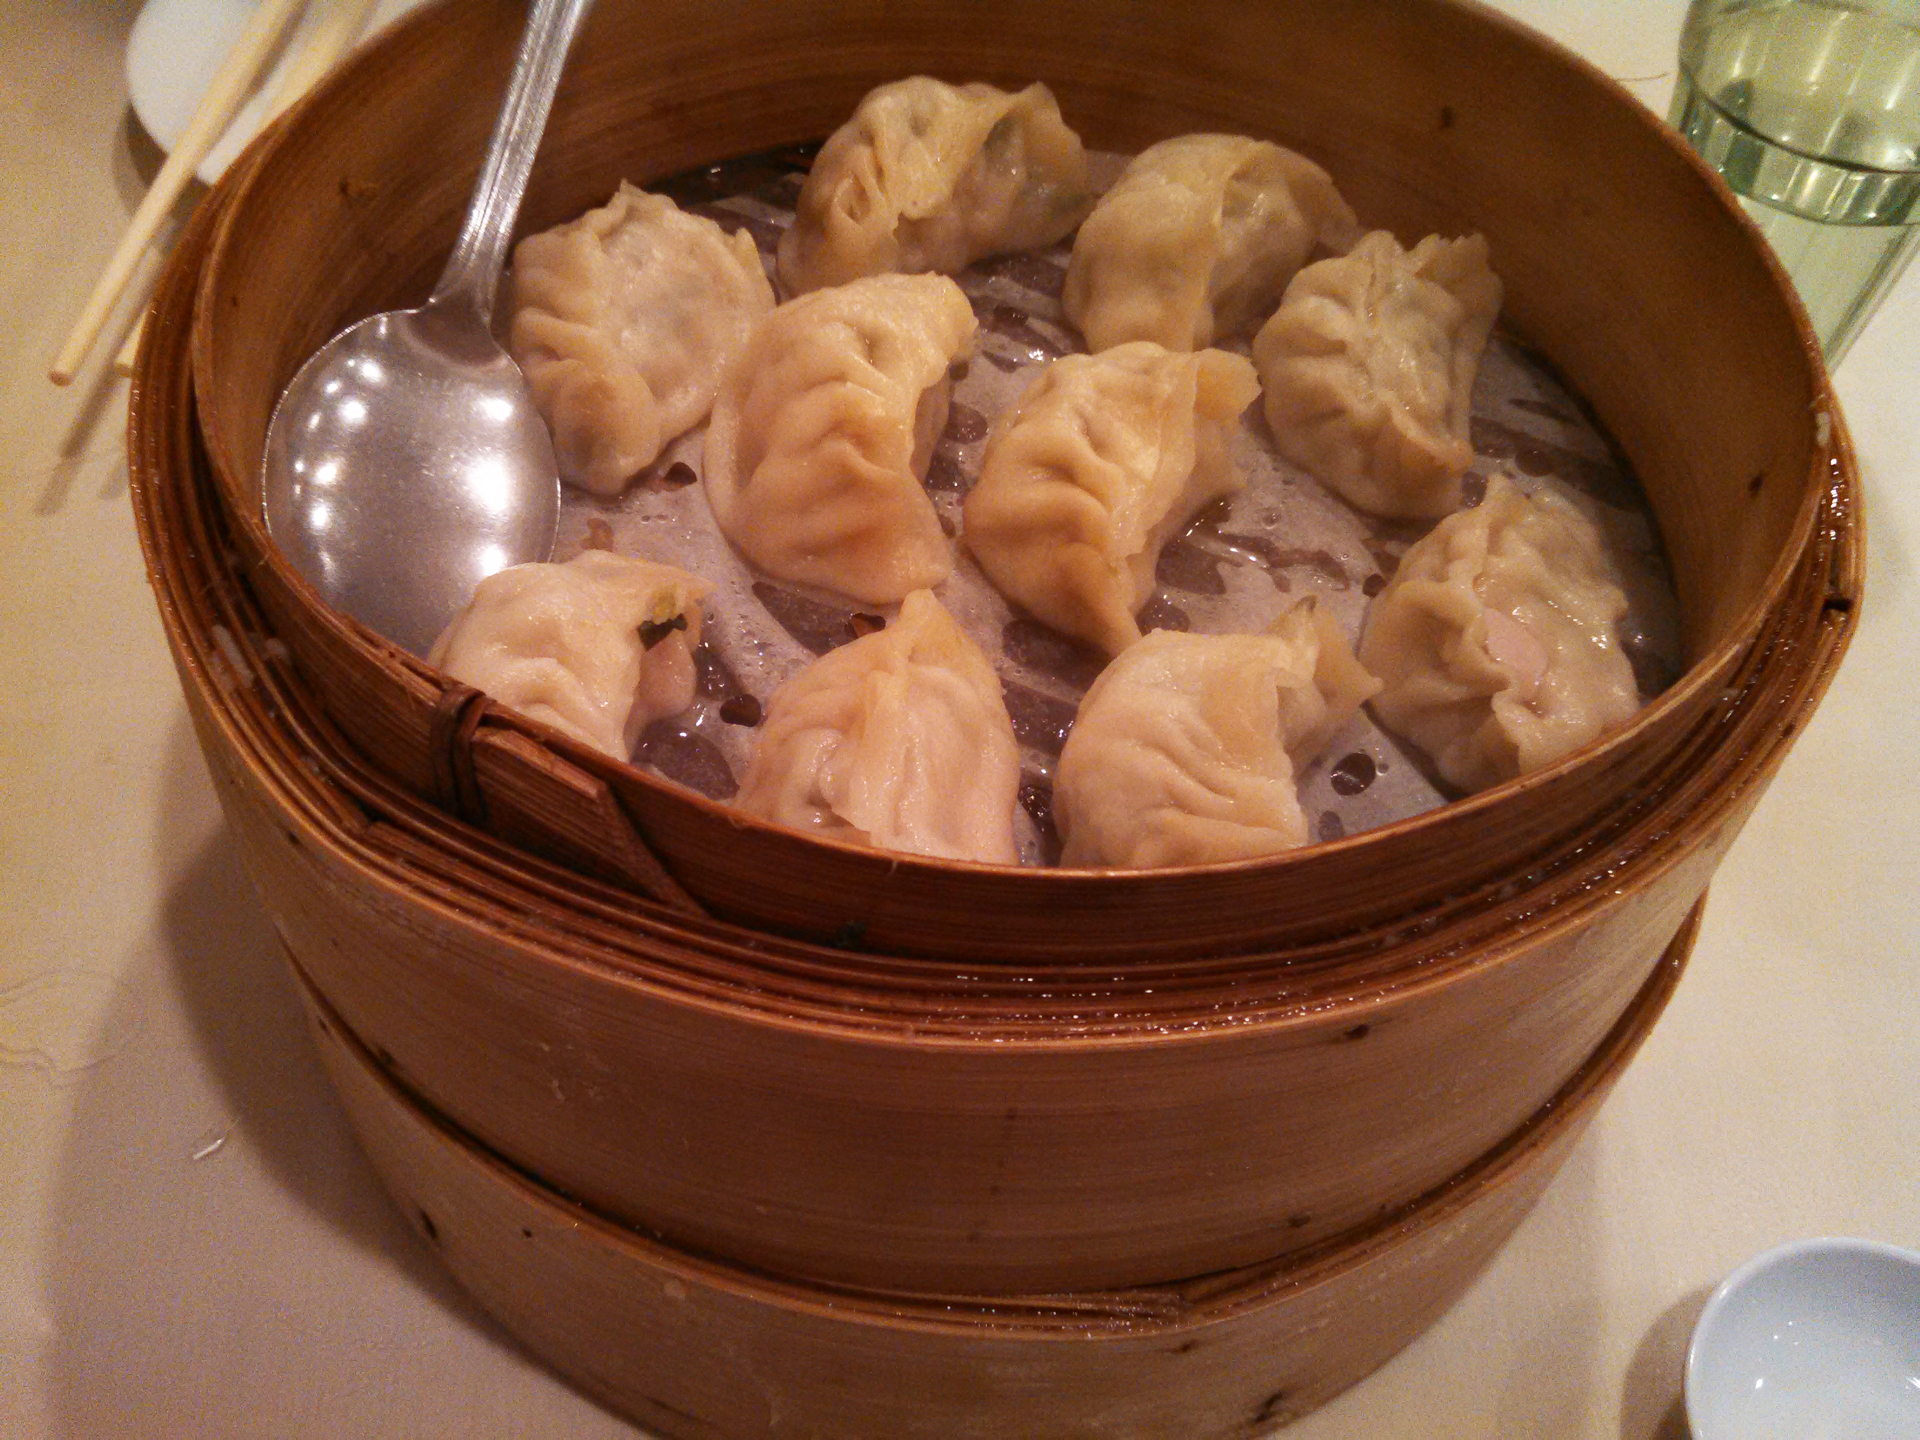 The steamed dumplings are served in their wooden trays